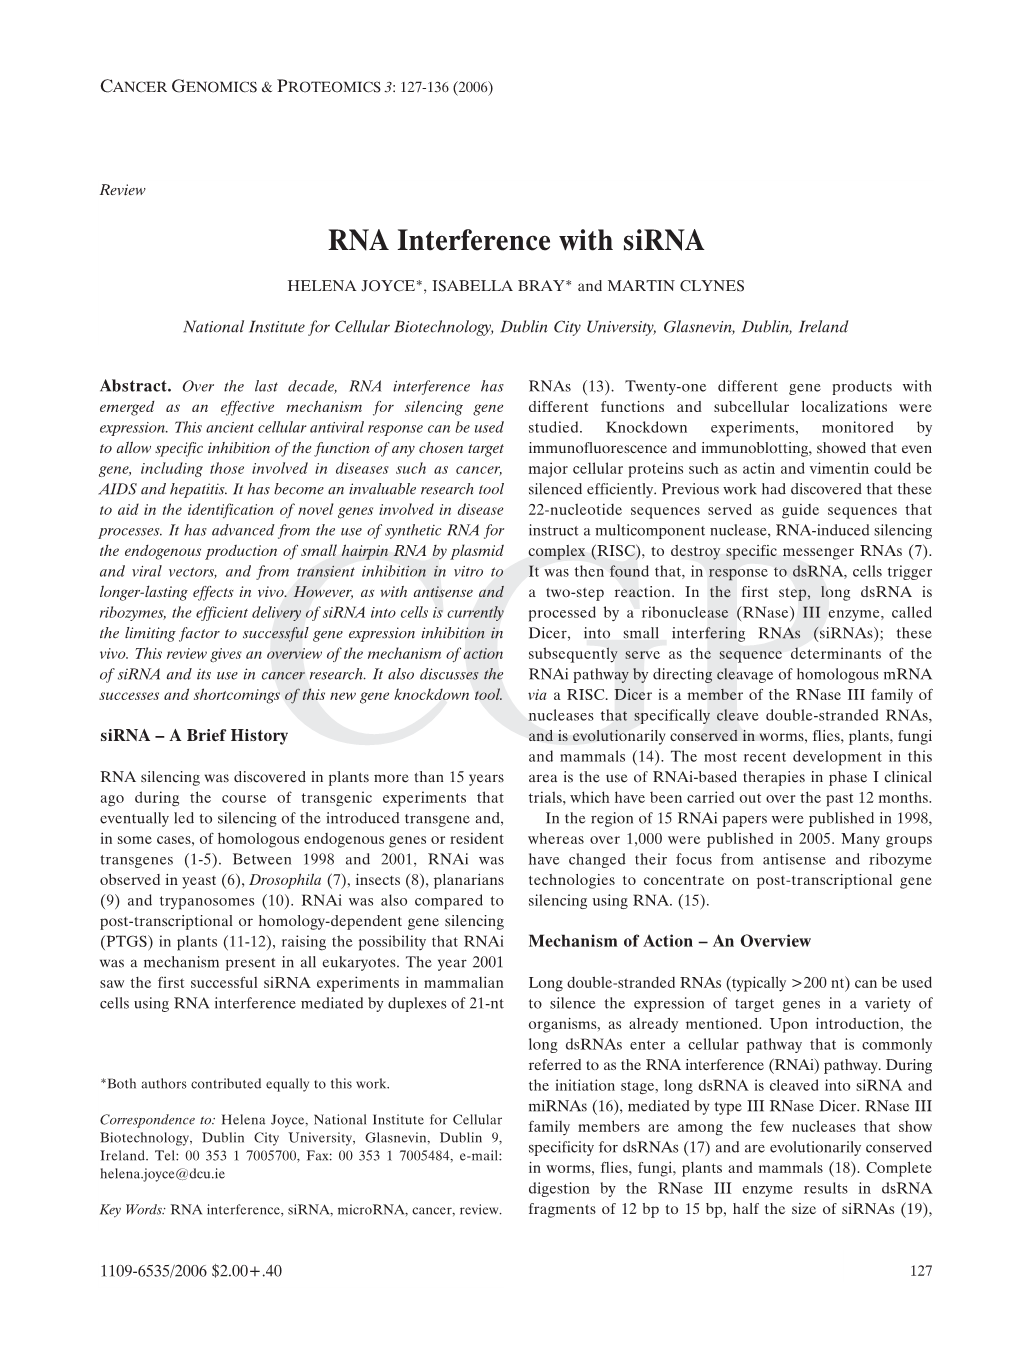 RNA Interference with Sirna